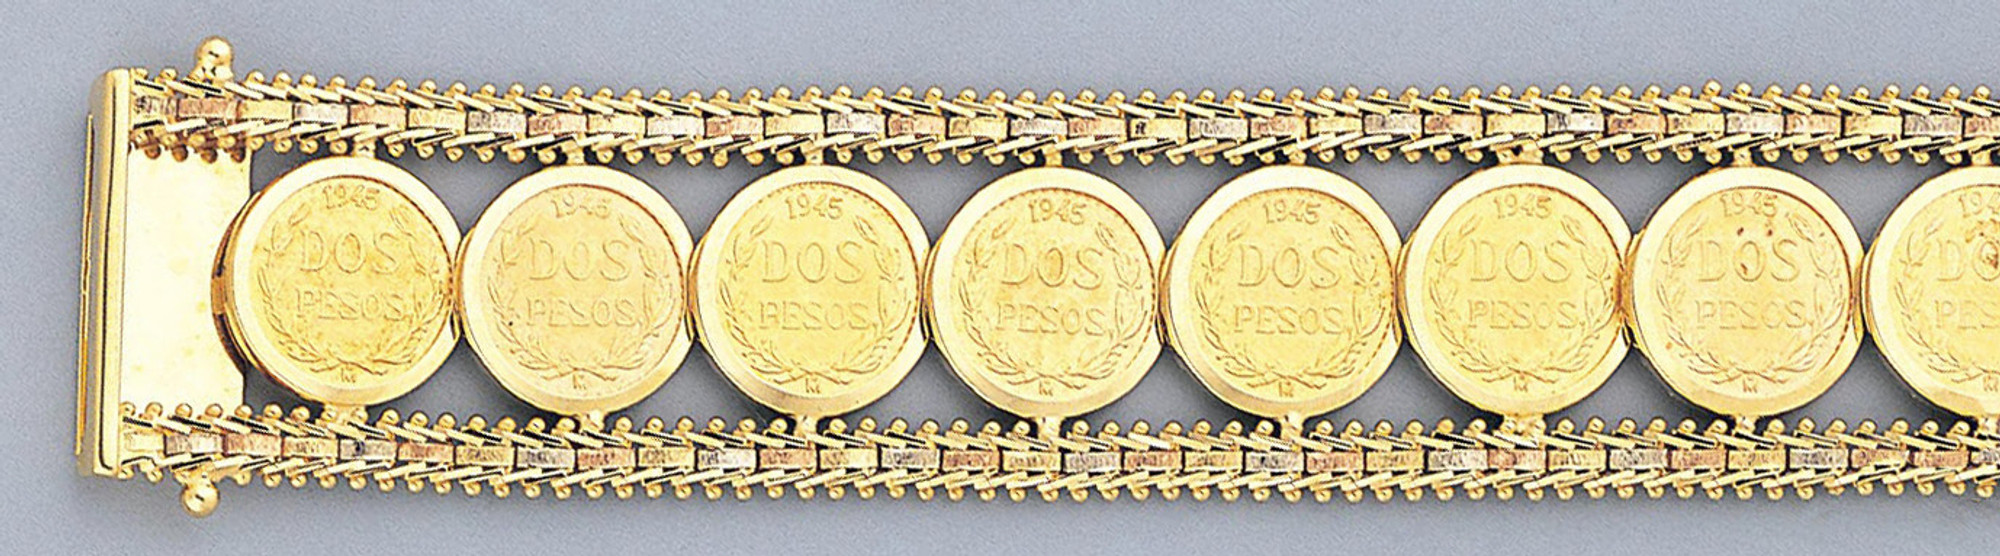 MEXICAN DOS PESOS GOLD COIN BRACELET in United States